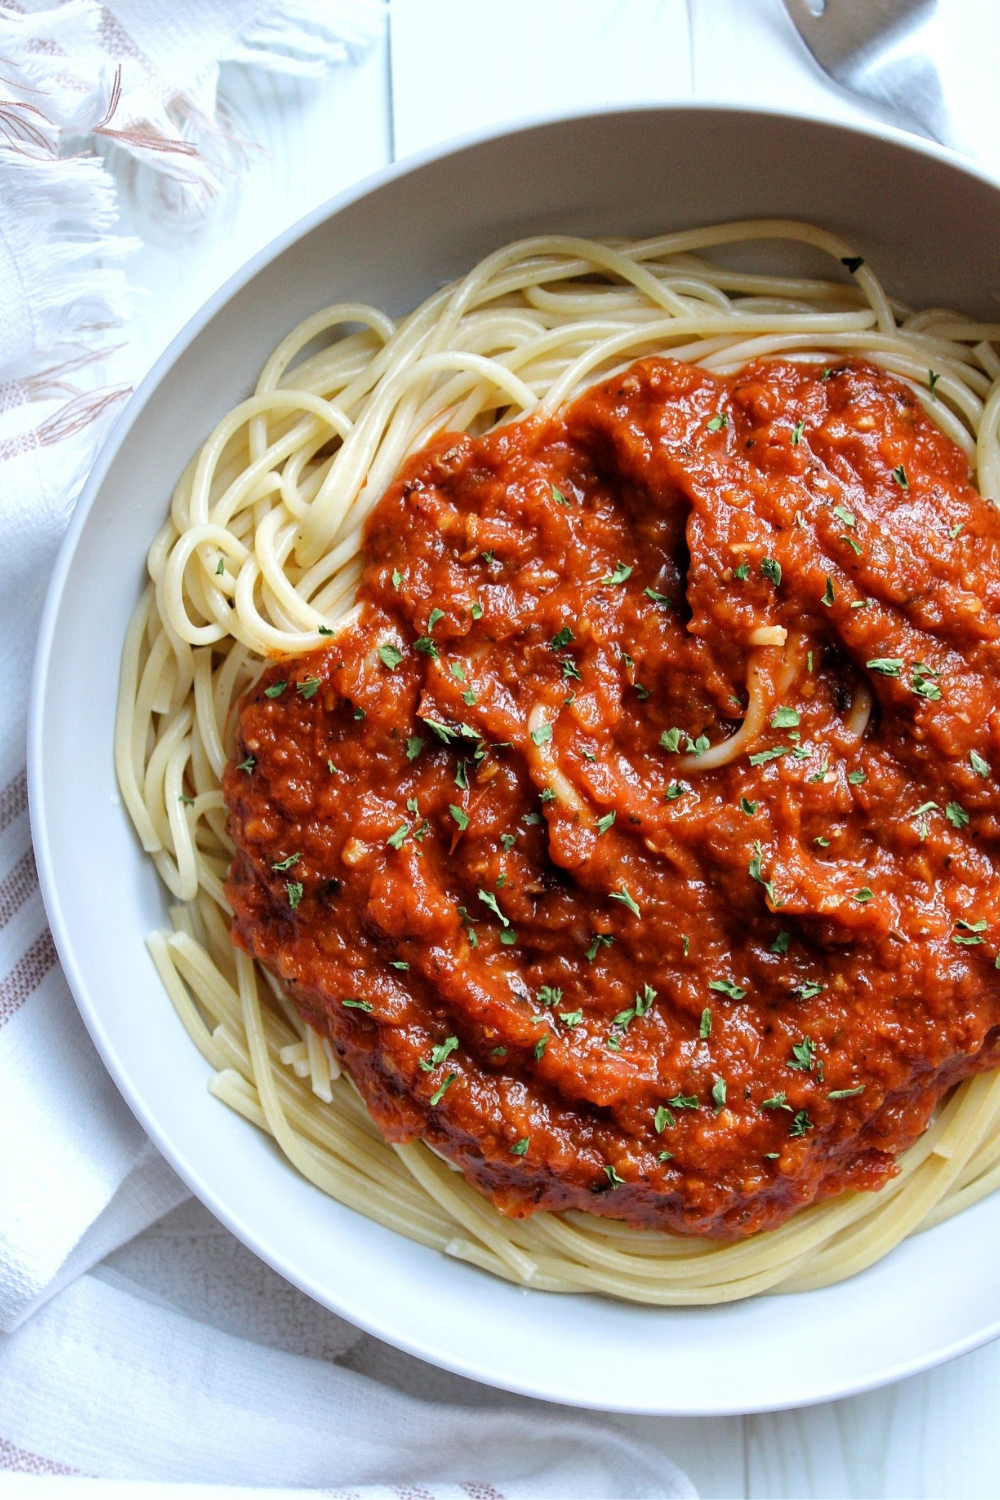 Bowl of spaghetti topped with homemade spaghetti sauce garnished with parsley